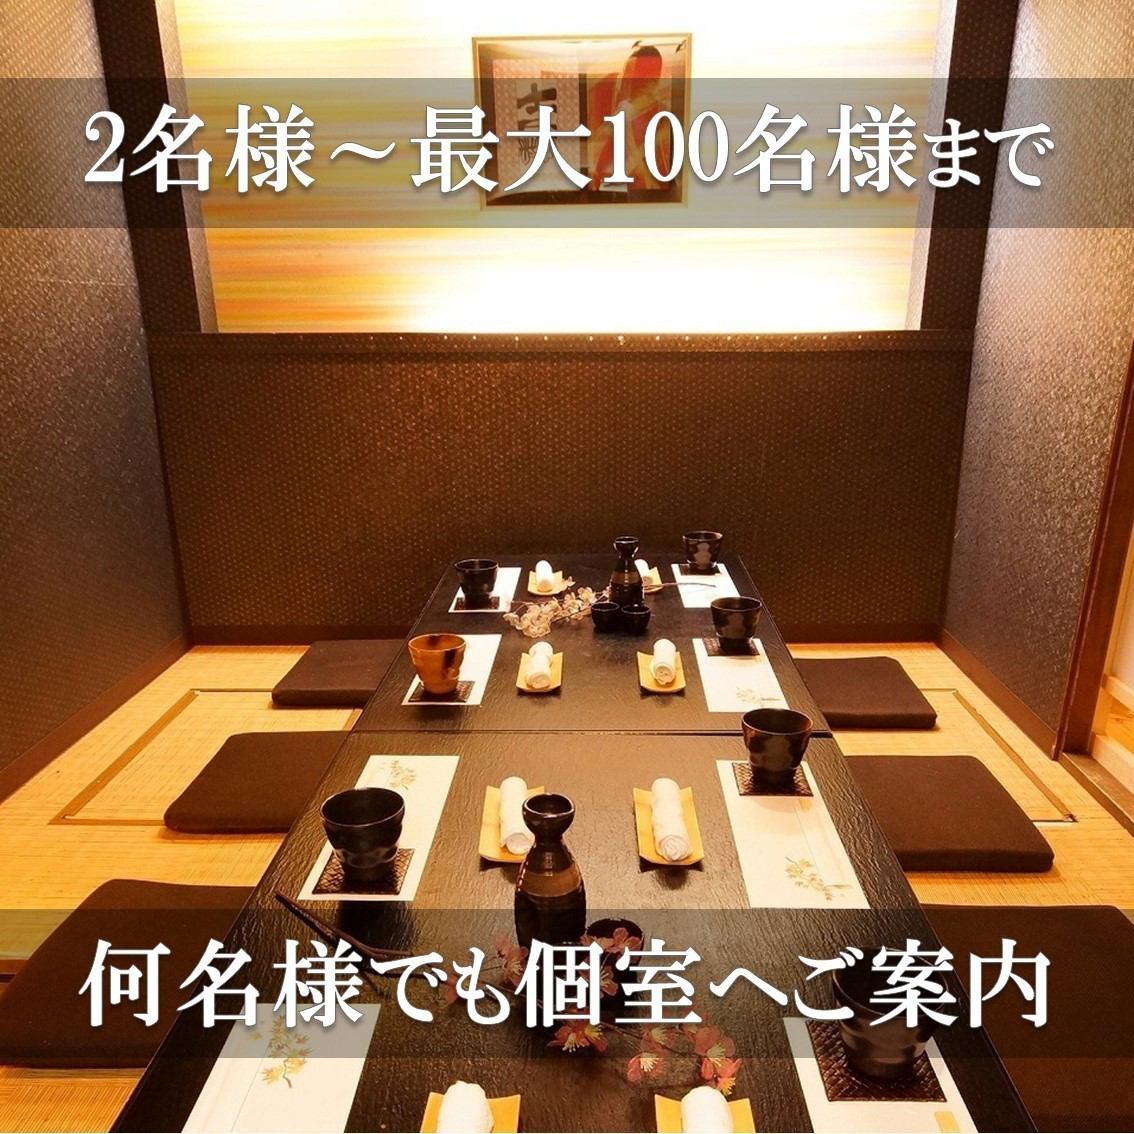 [Complete private room] Large and small private rooms that can be enjoyed without worrying about the surroundings 5 to 10 people Private room with seats